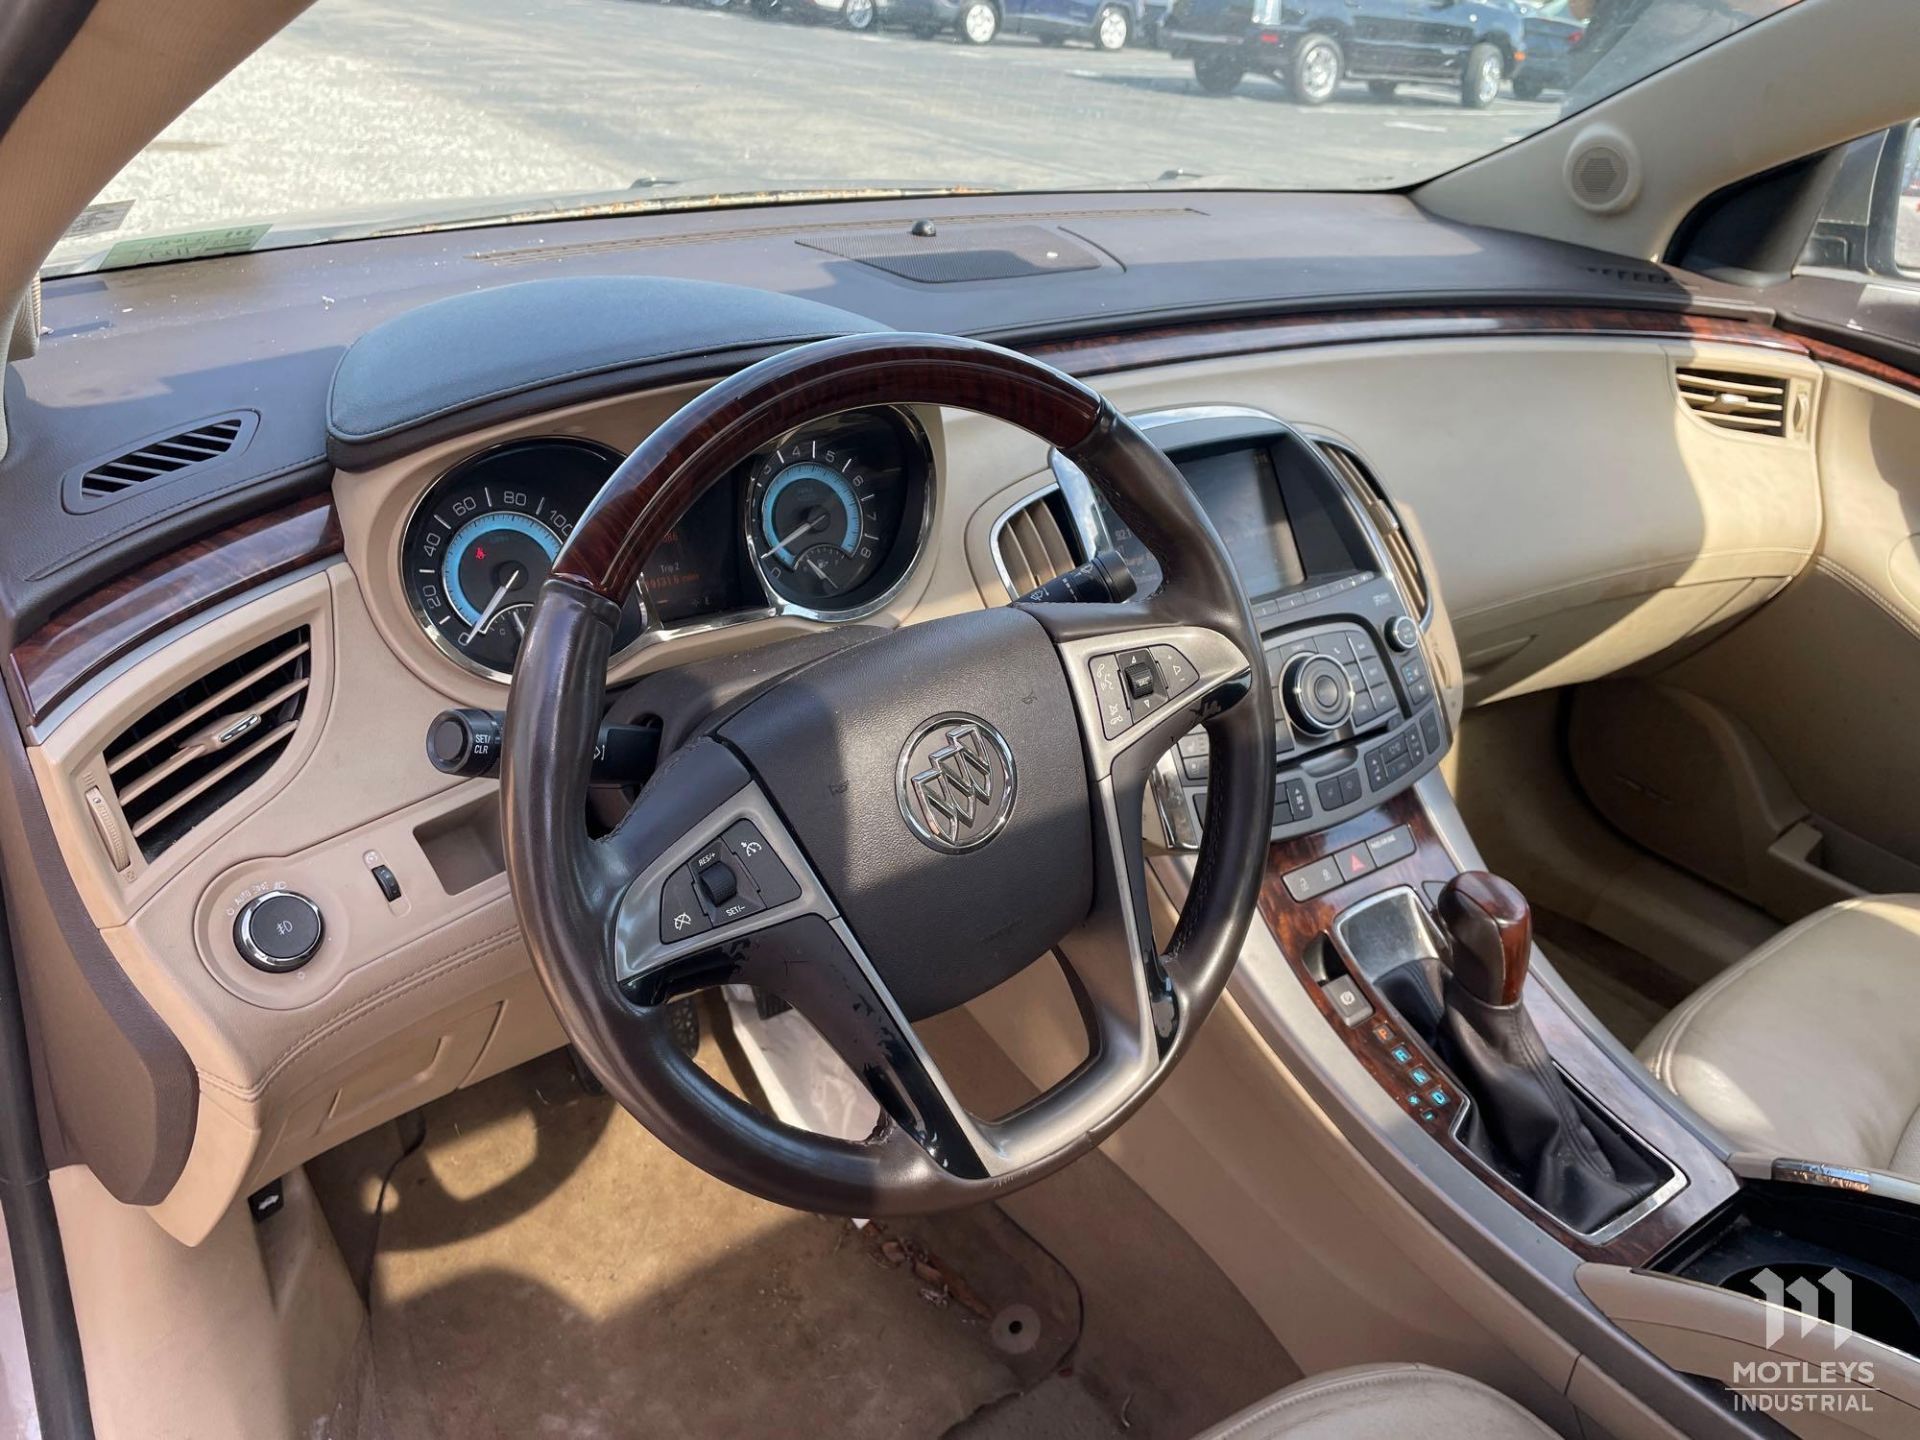 2010 Buick Lacrosse - Image 7 of 22